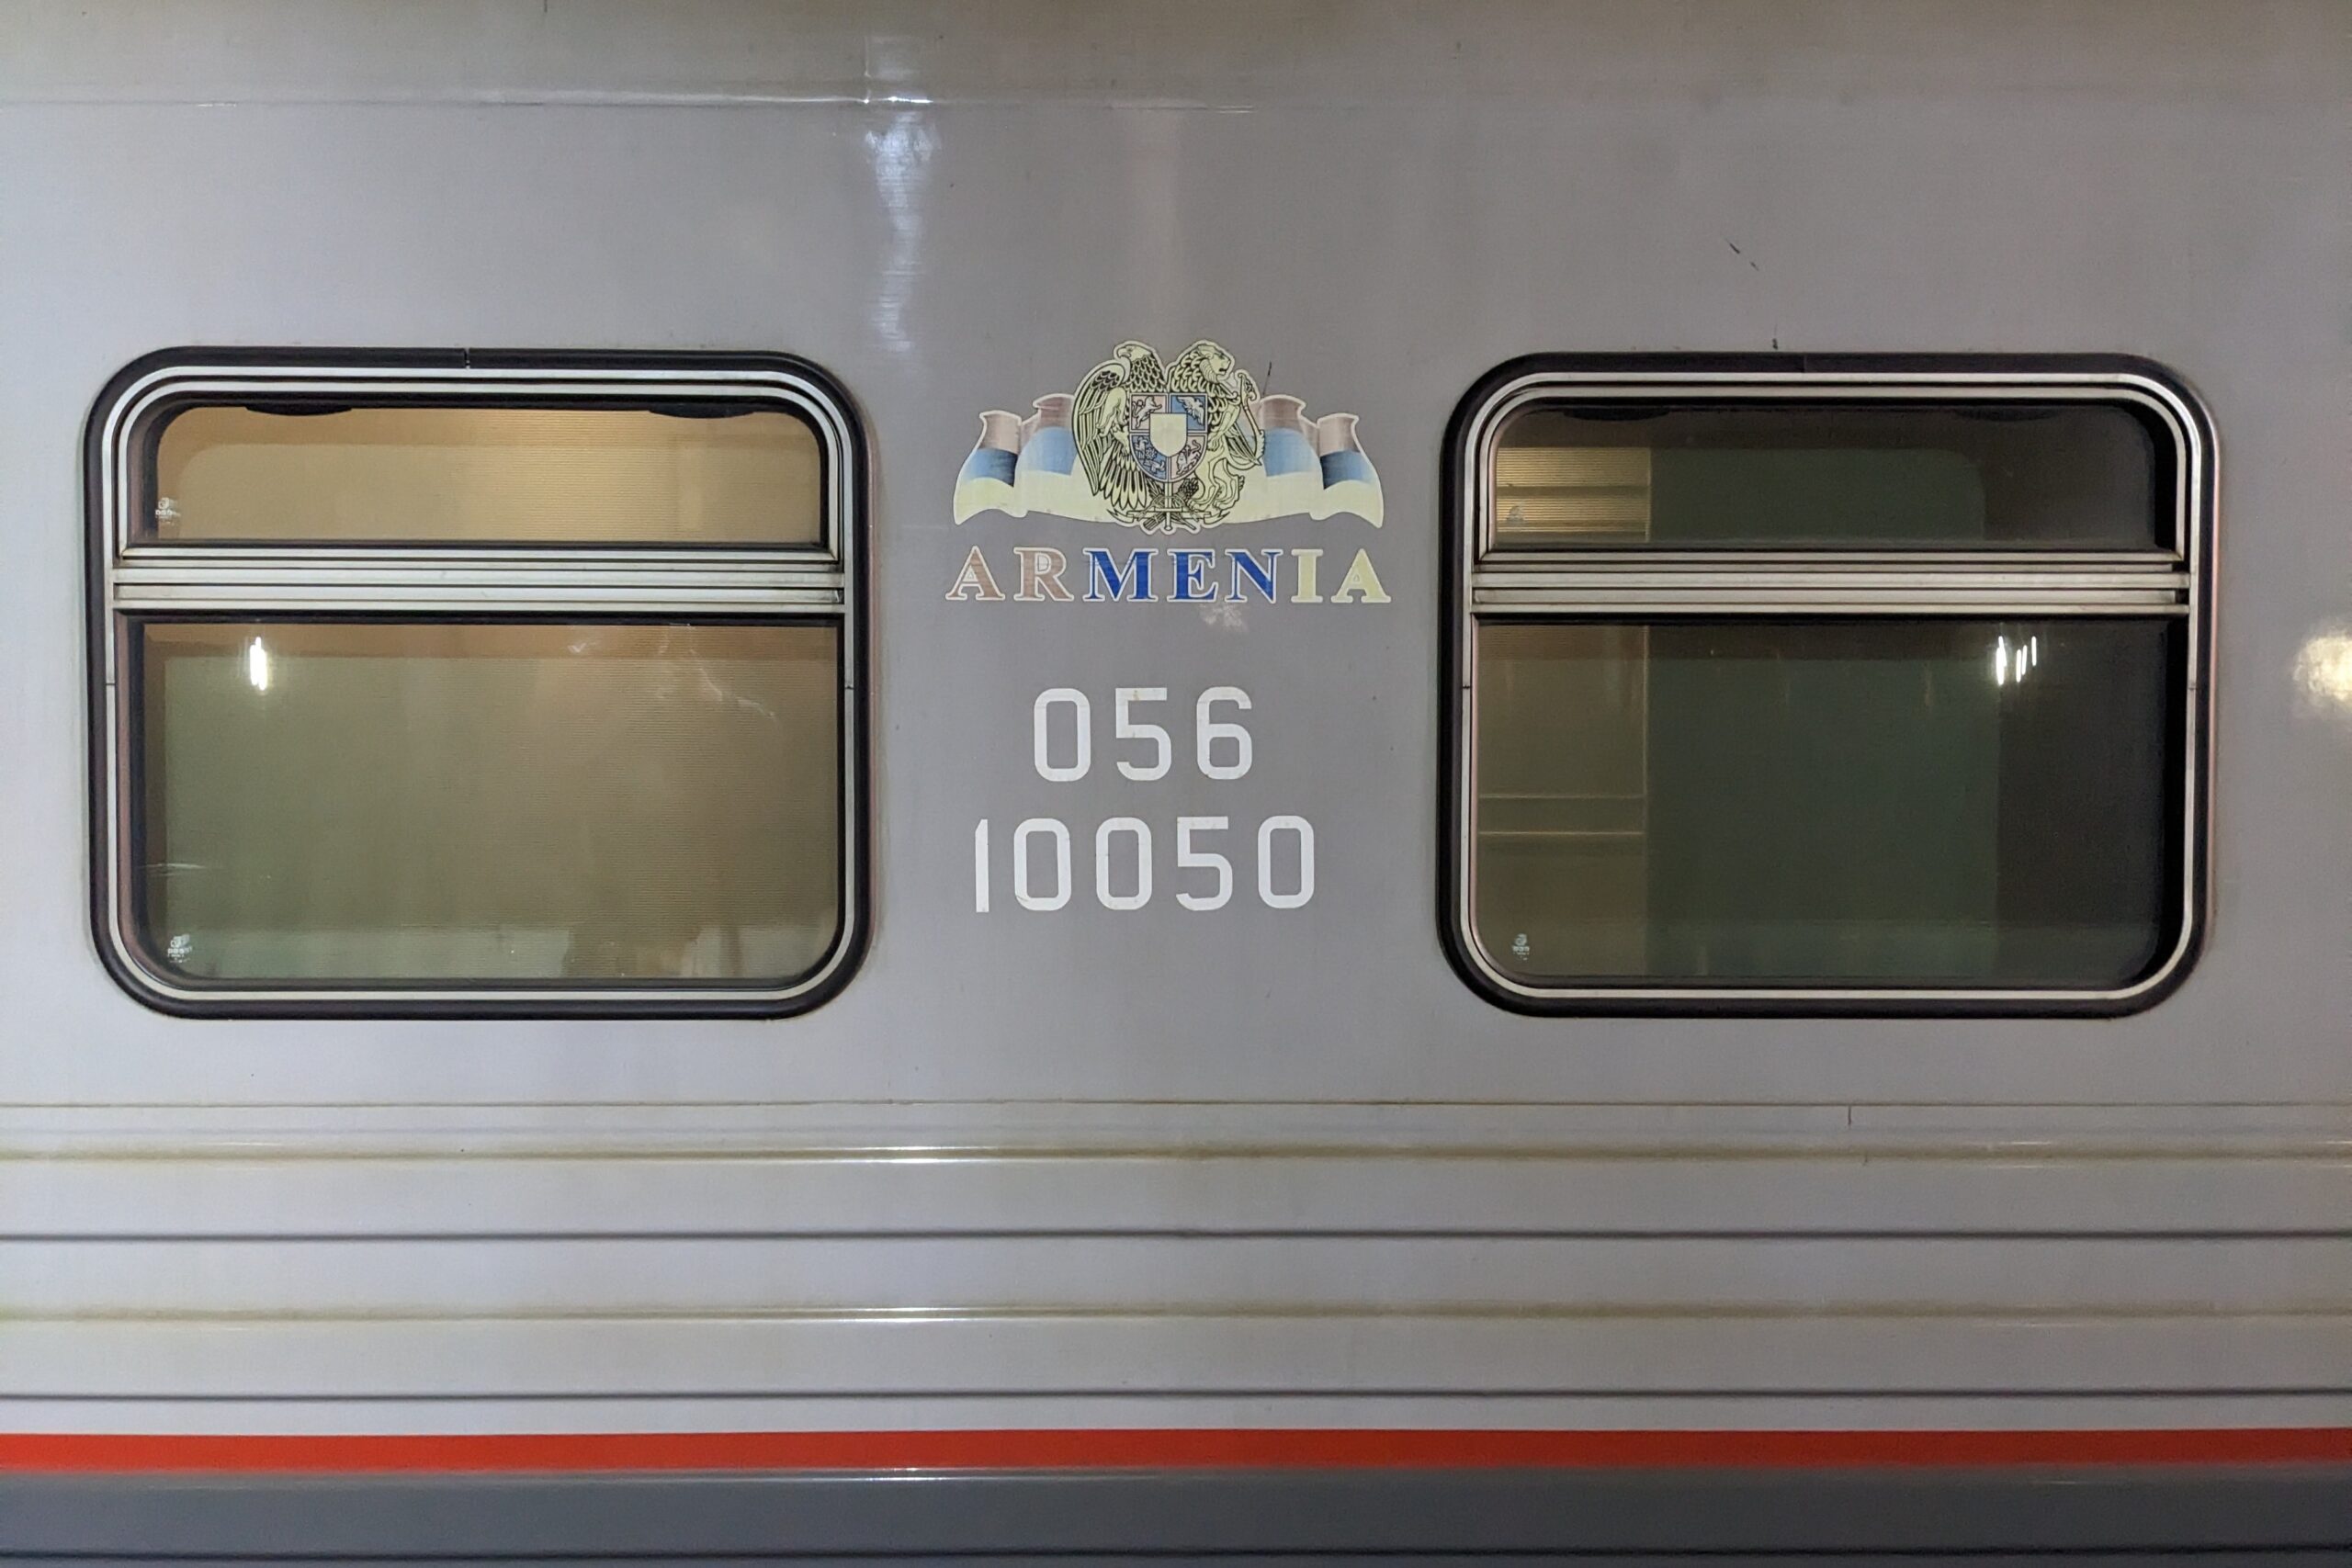 Top Tips for the Tbilisi to Yerevan Train